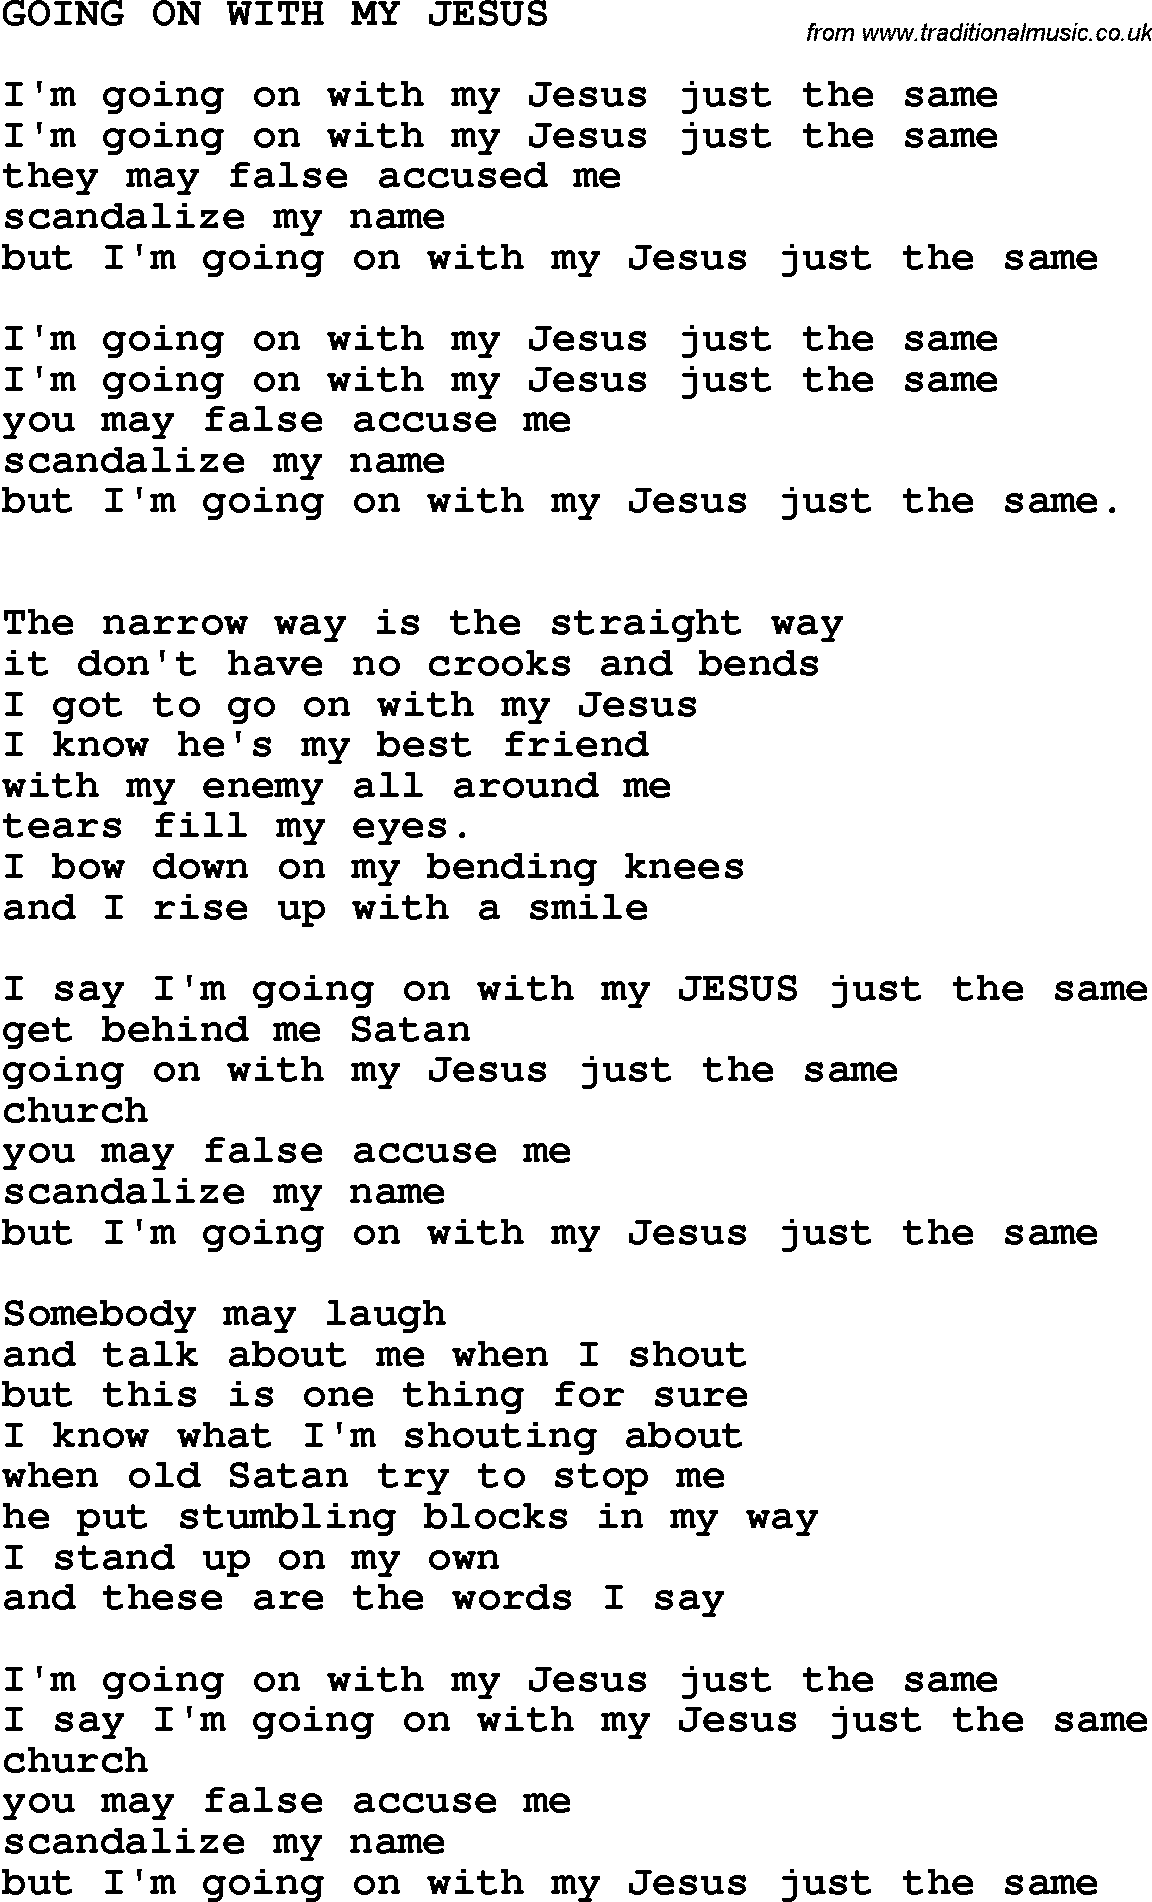 Country, Southern and Bluegrass Gospel Song Going On With My Jesus lyrics 